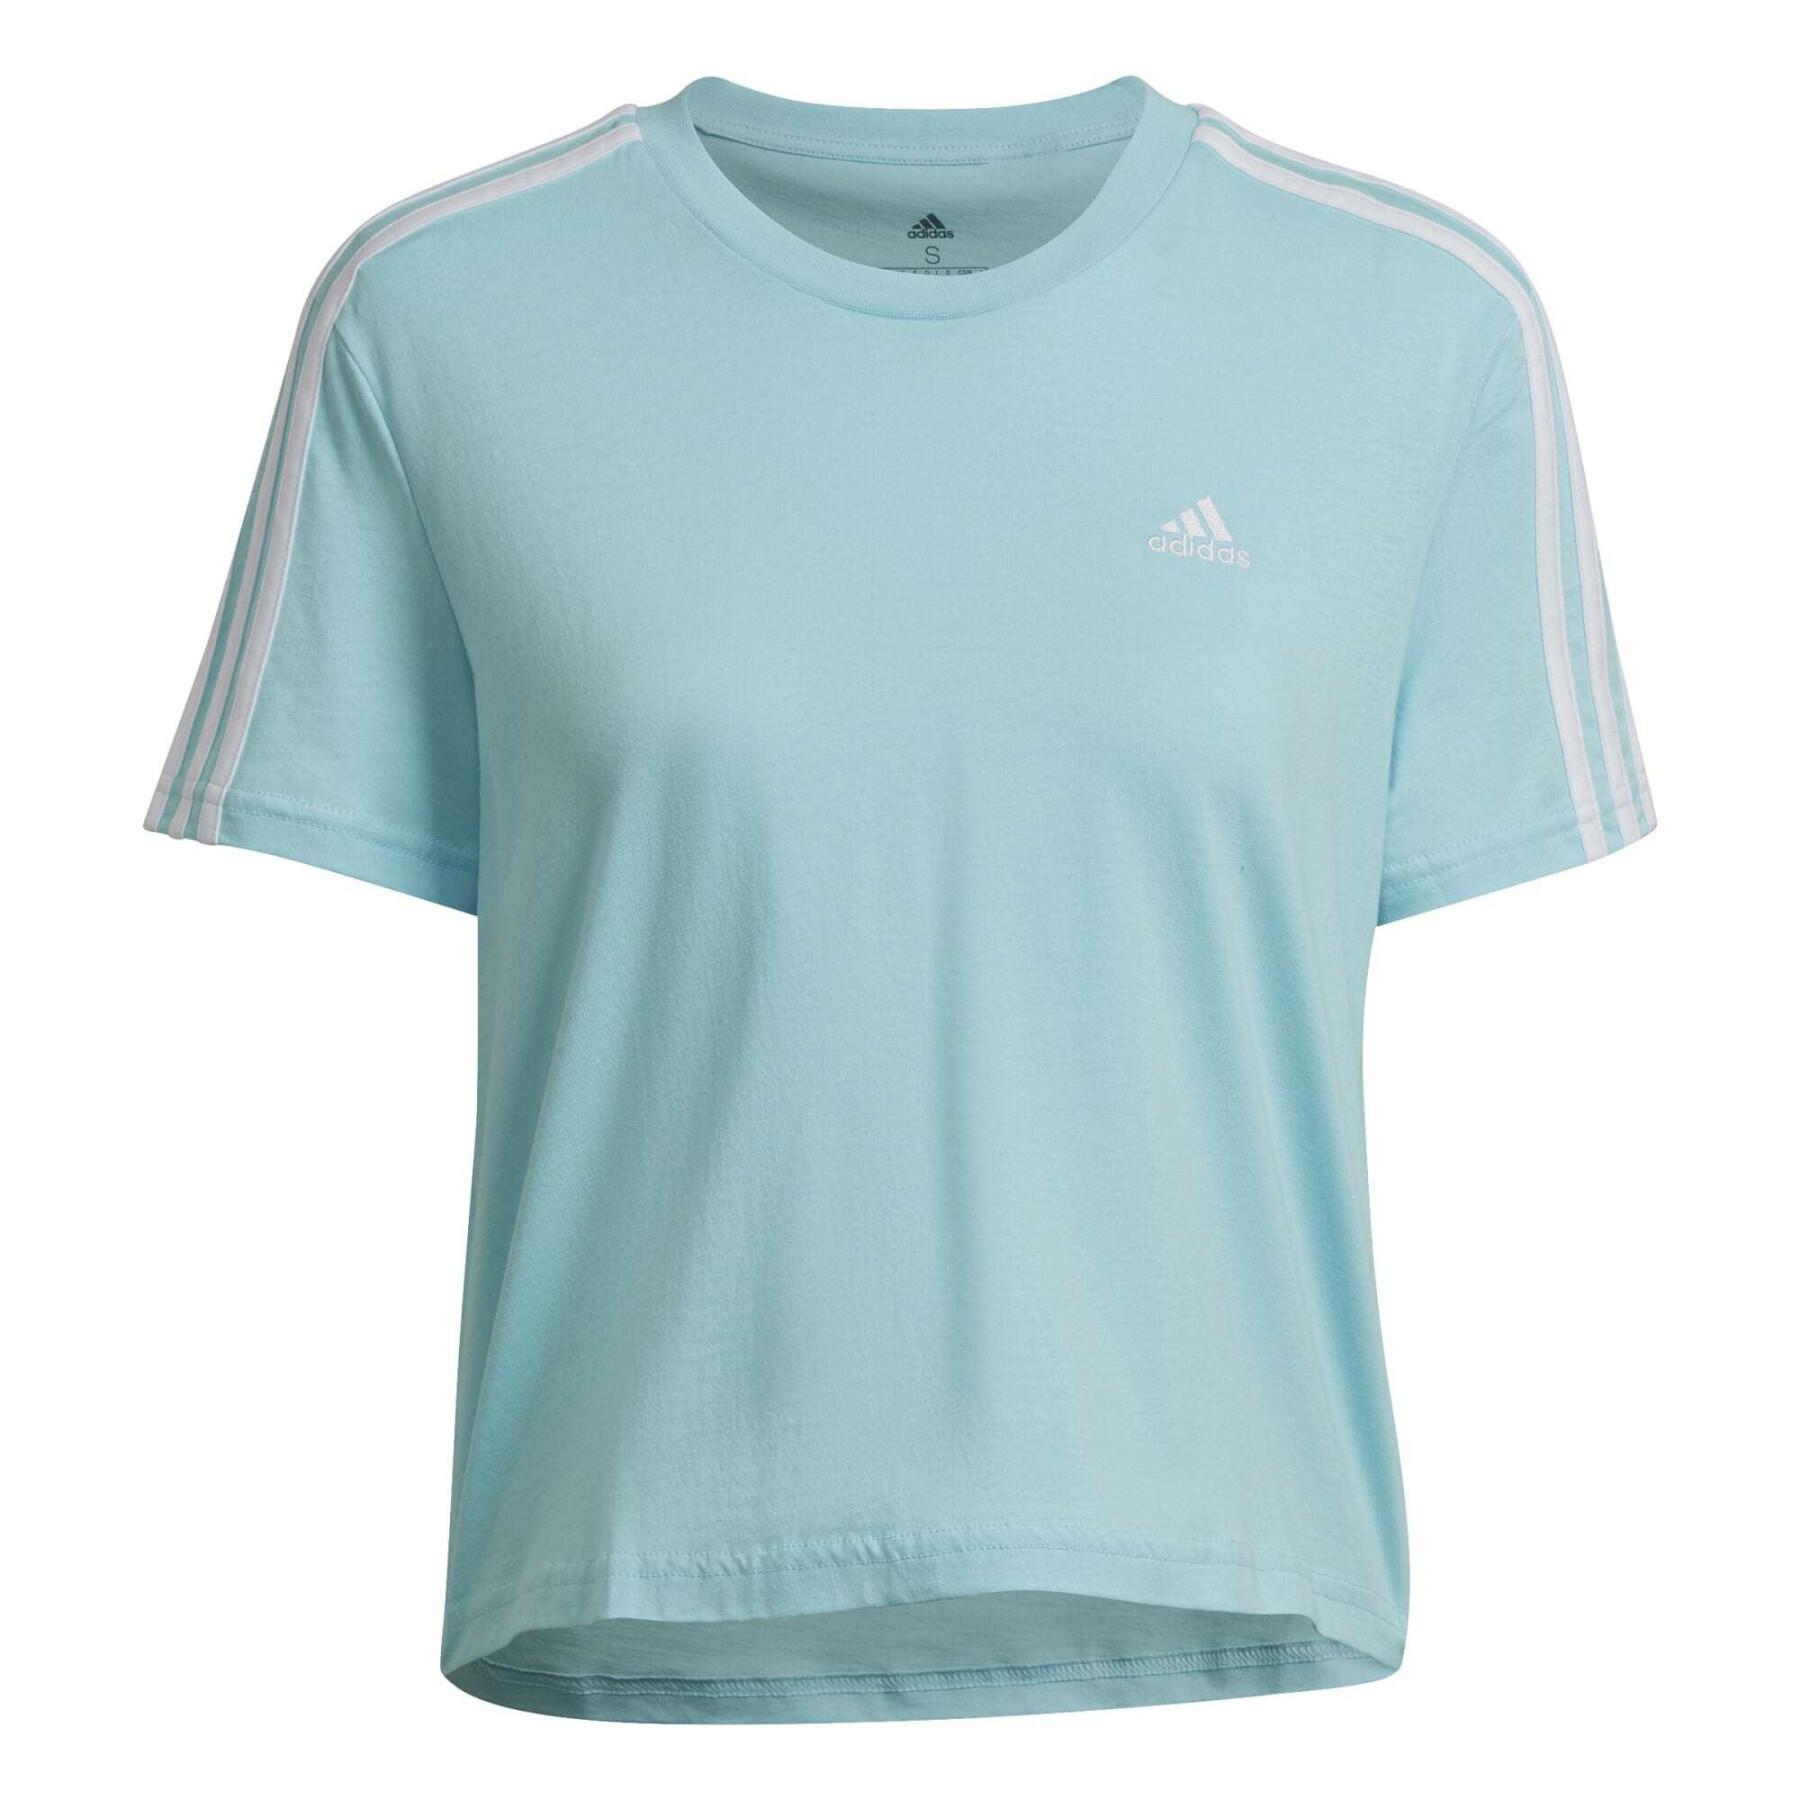 Absorb Make a bed tuition fee Loose-fitting short T-shirt with 3 stripes adidas Essentials